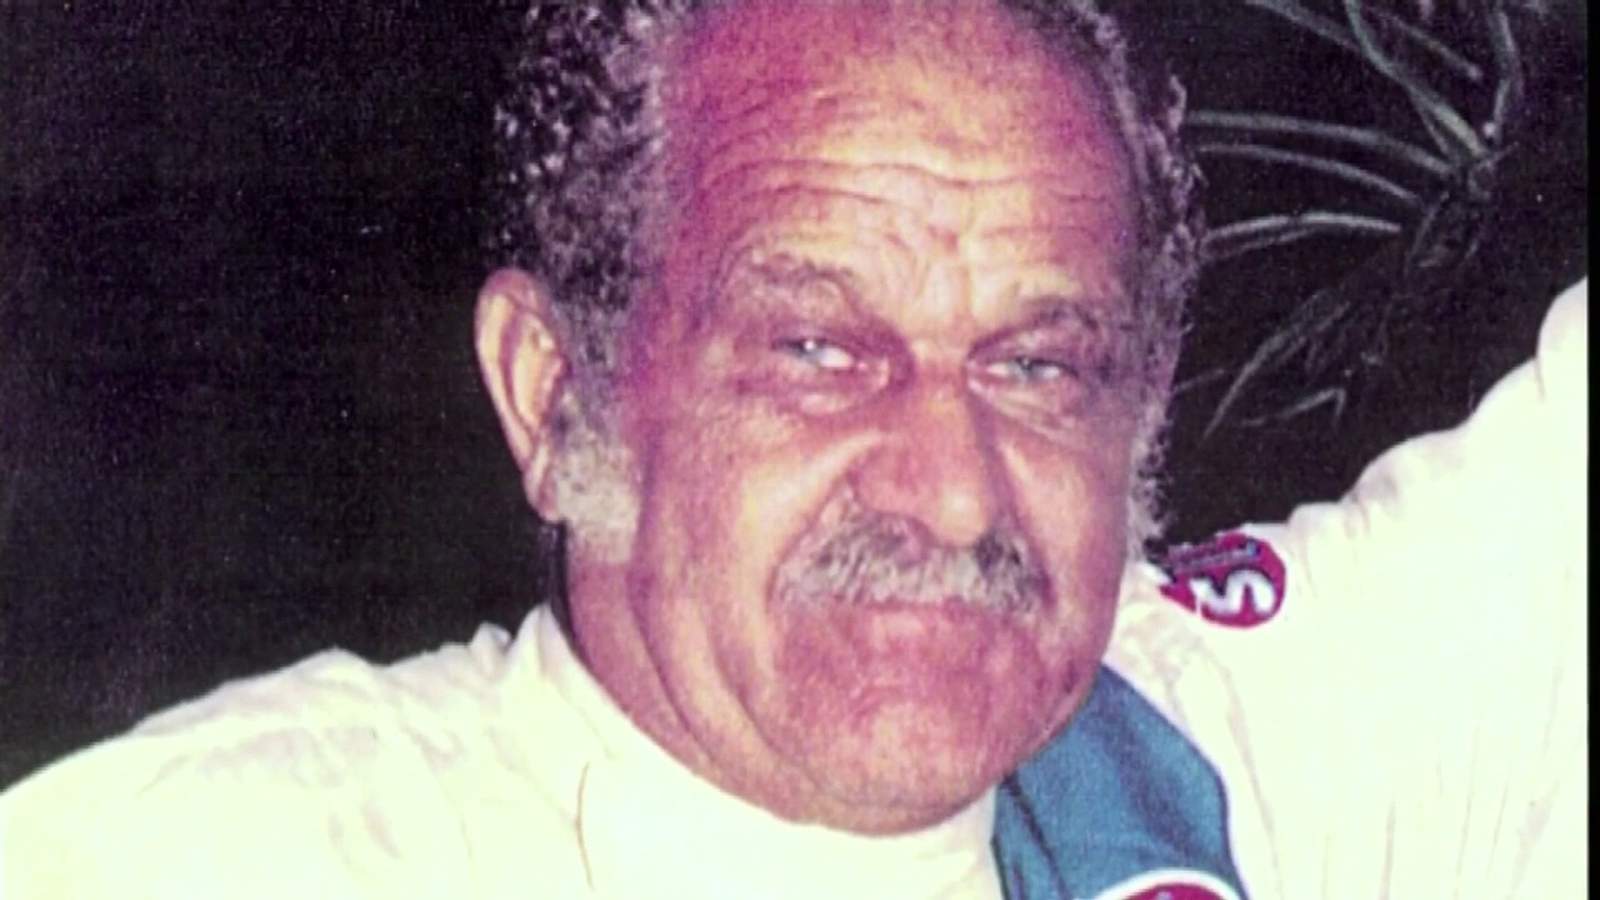 Paving the way: How Danville native Wendell Scott blazed a trail for African Americans in NASCAR